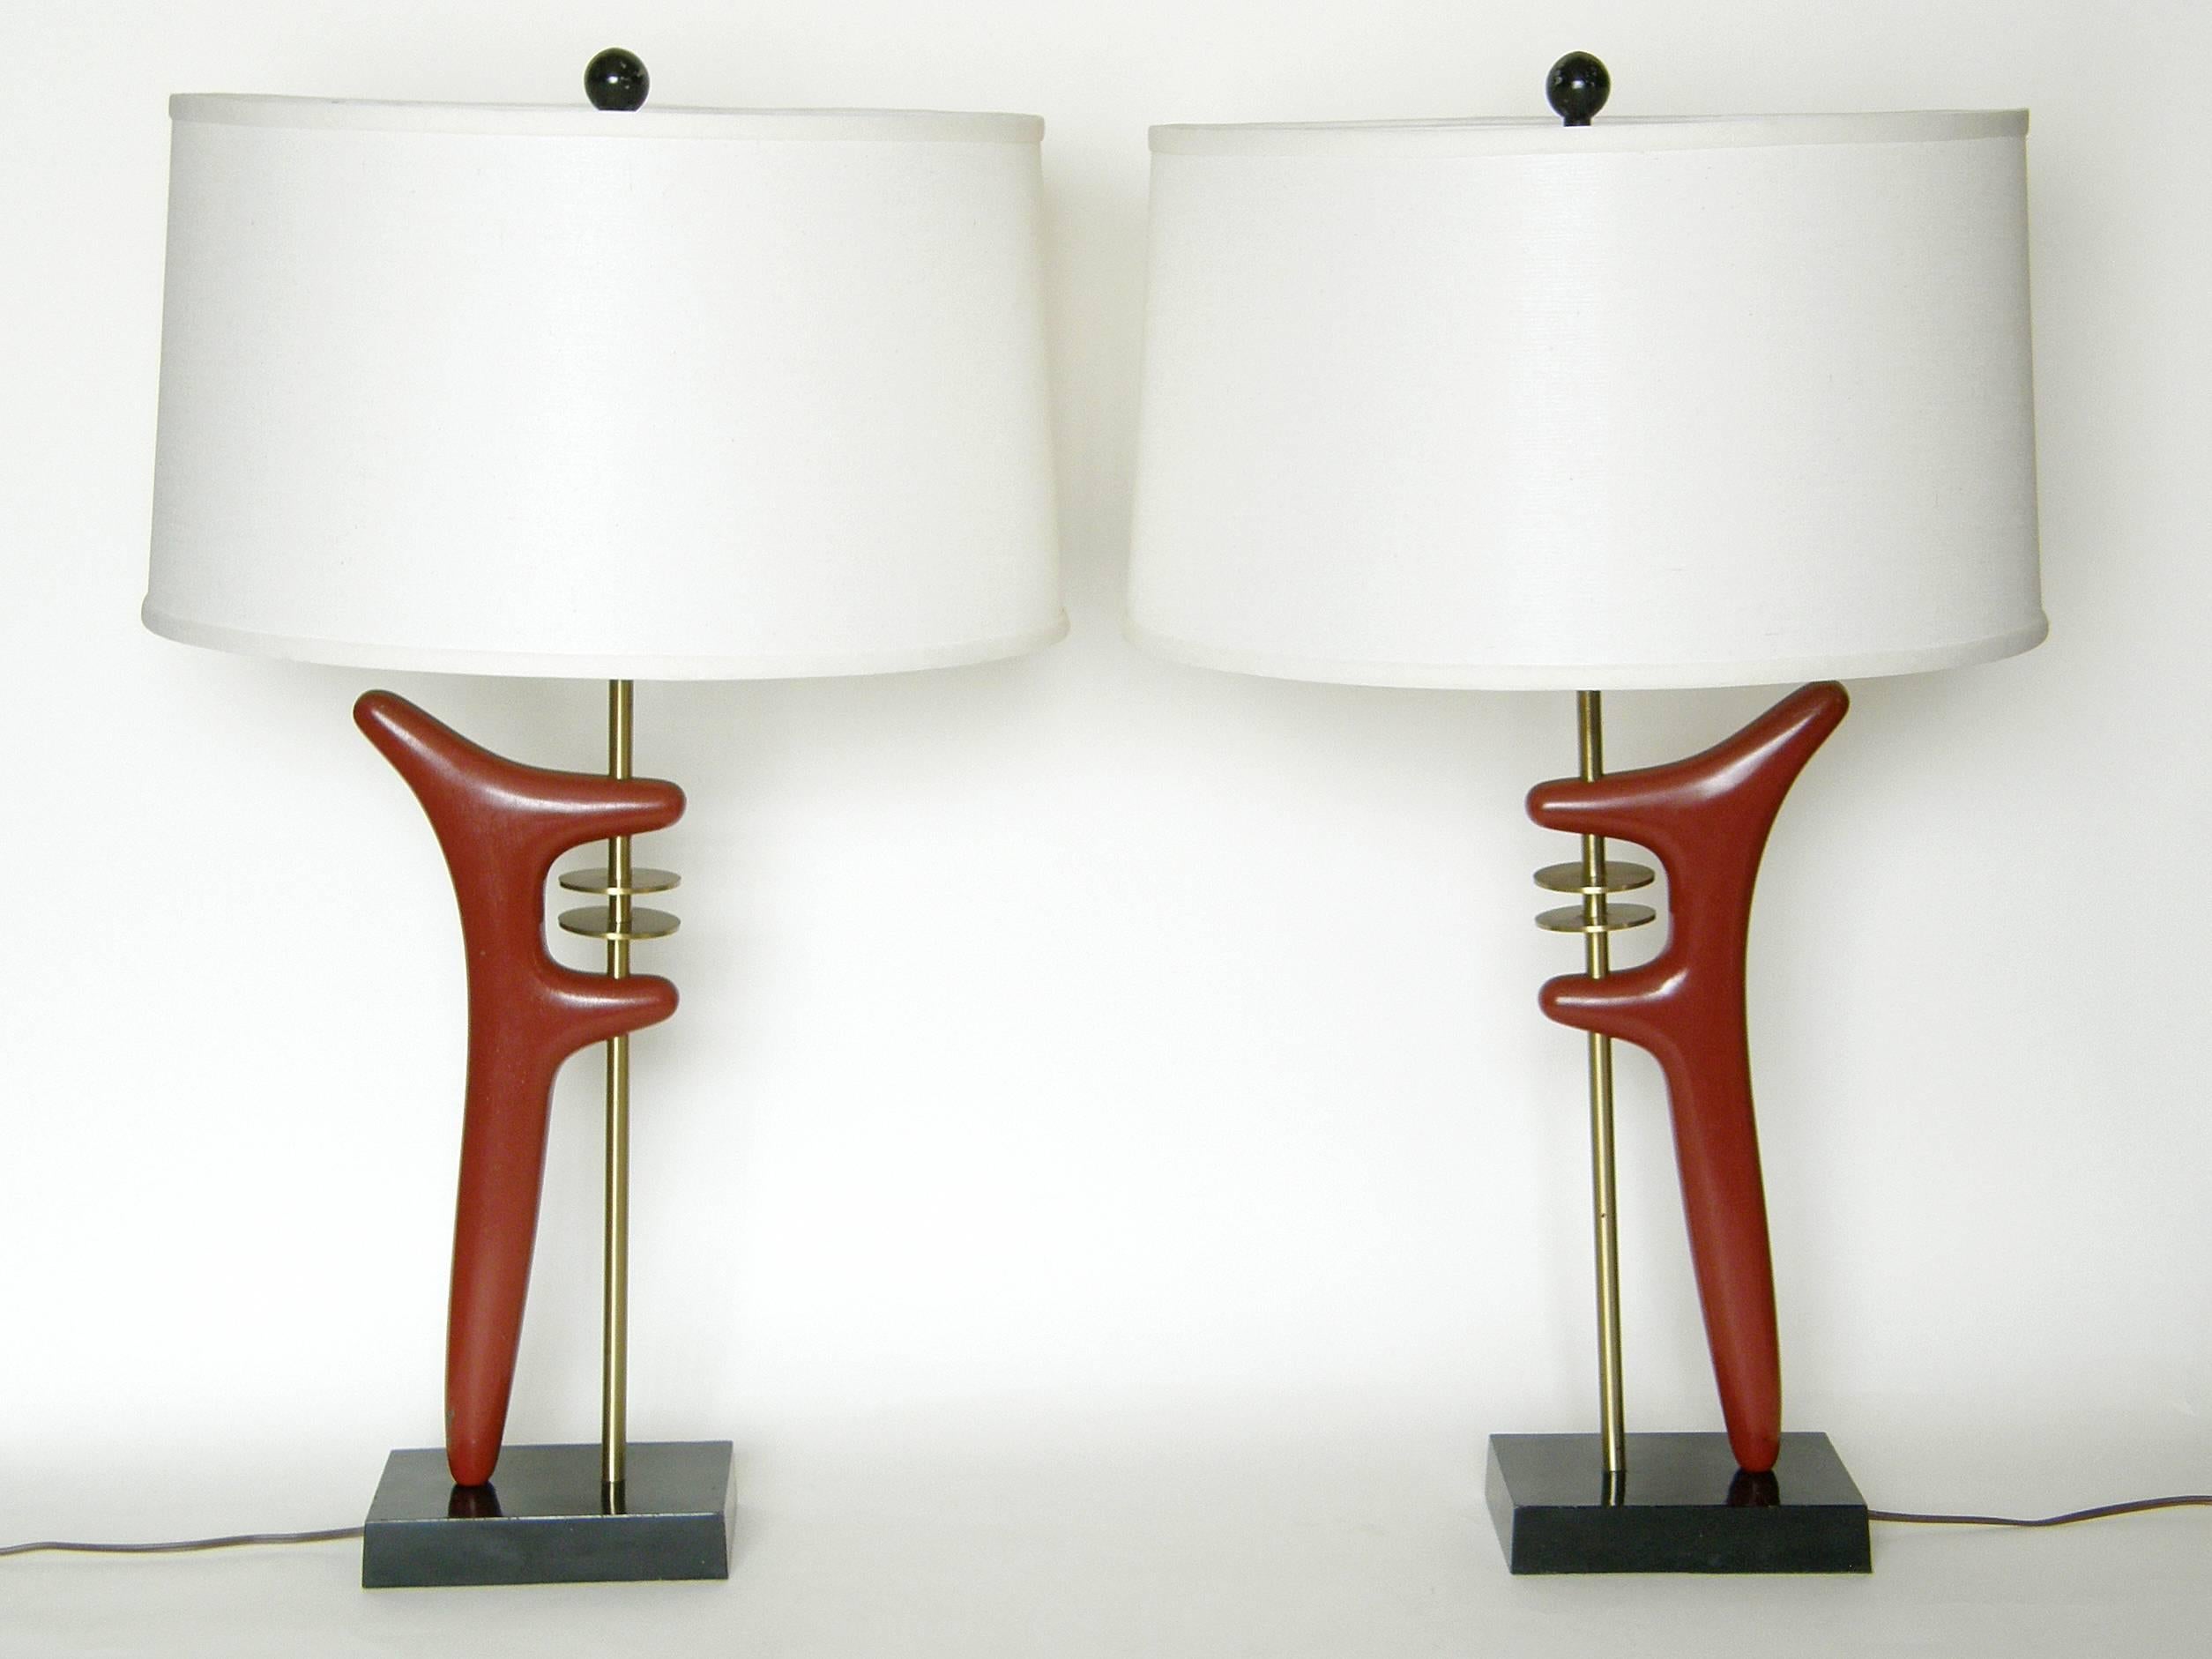 Pair of brass and enameled metal table lamps, design after a sculpture by 20th century modern master sculptor, Isamu Noguchi.

base- 7.25